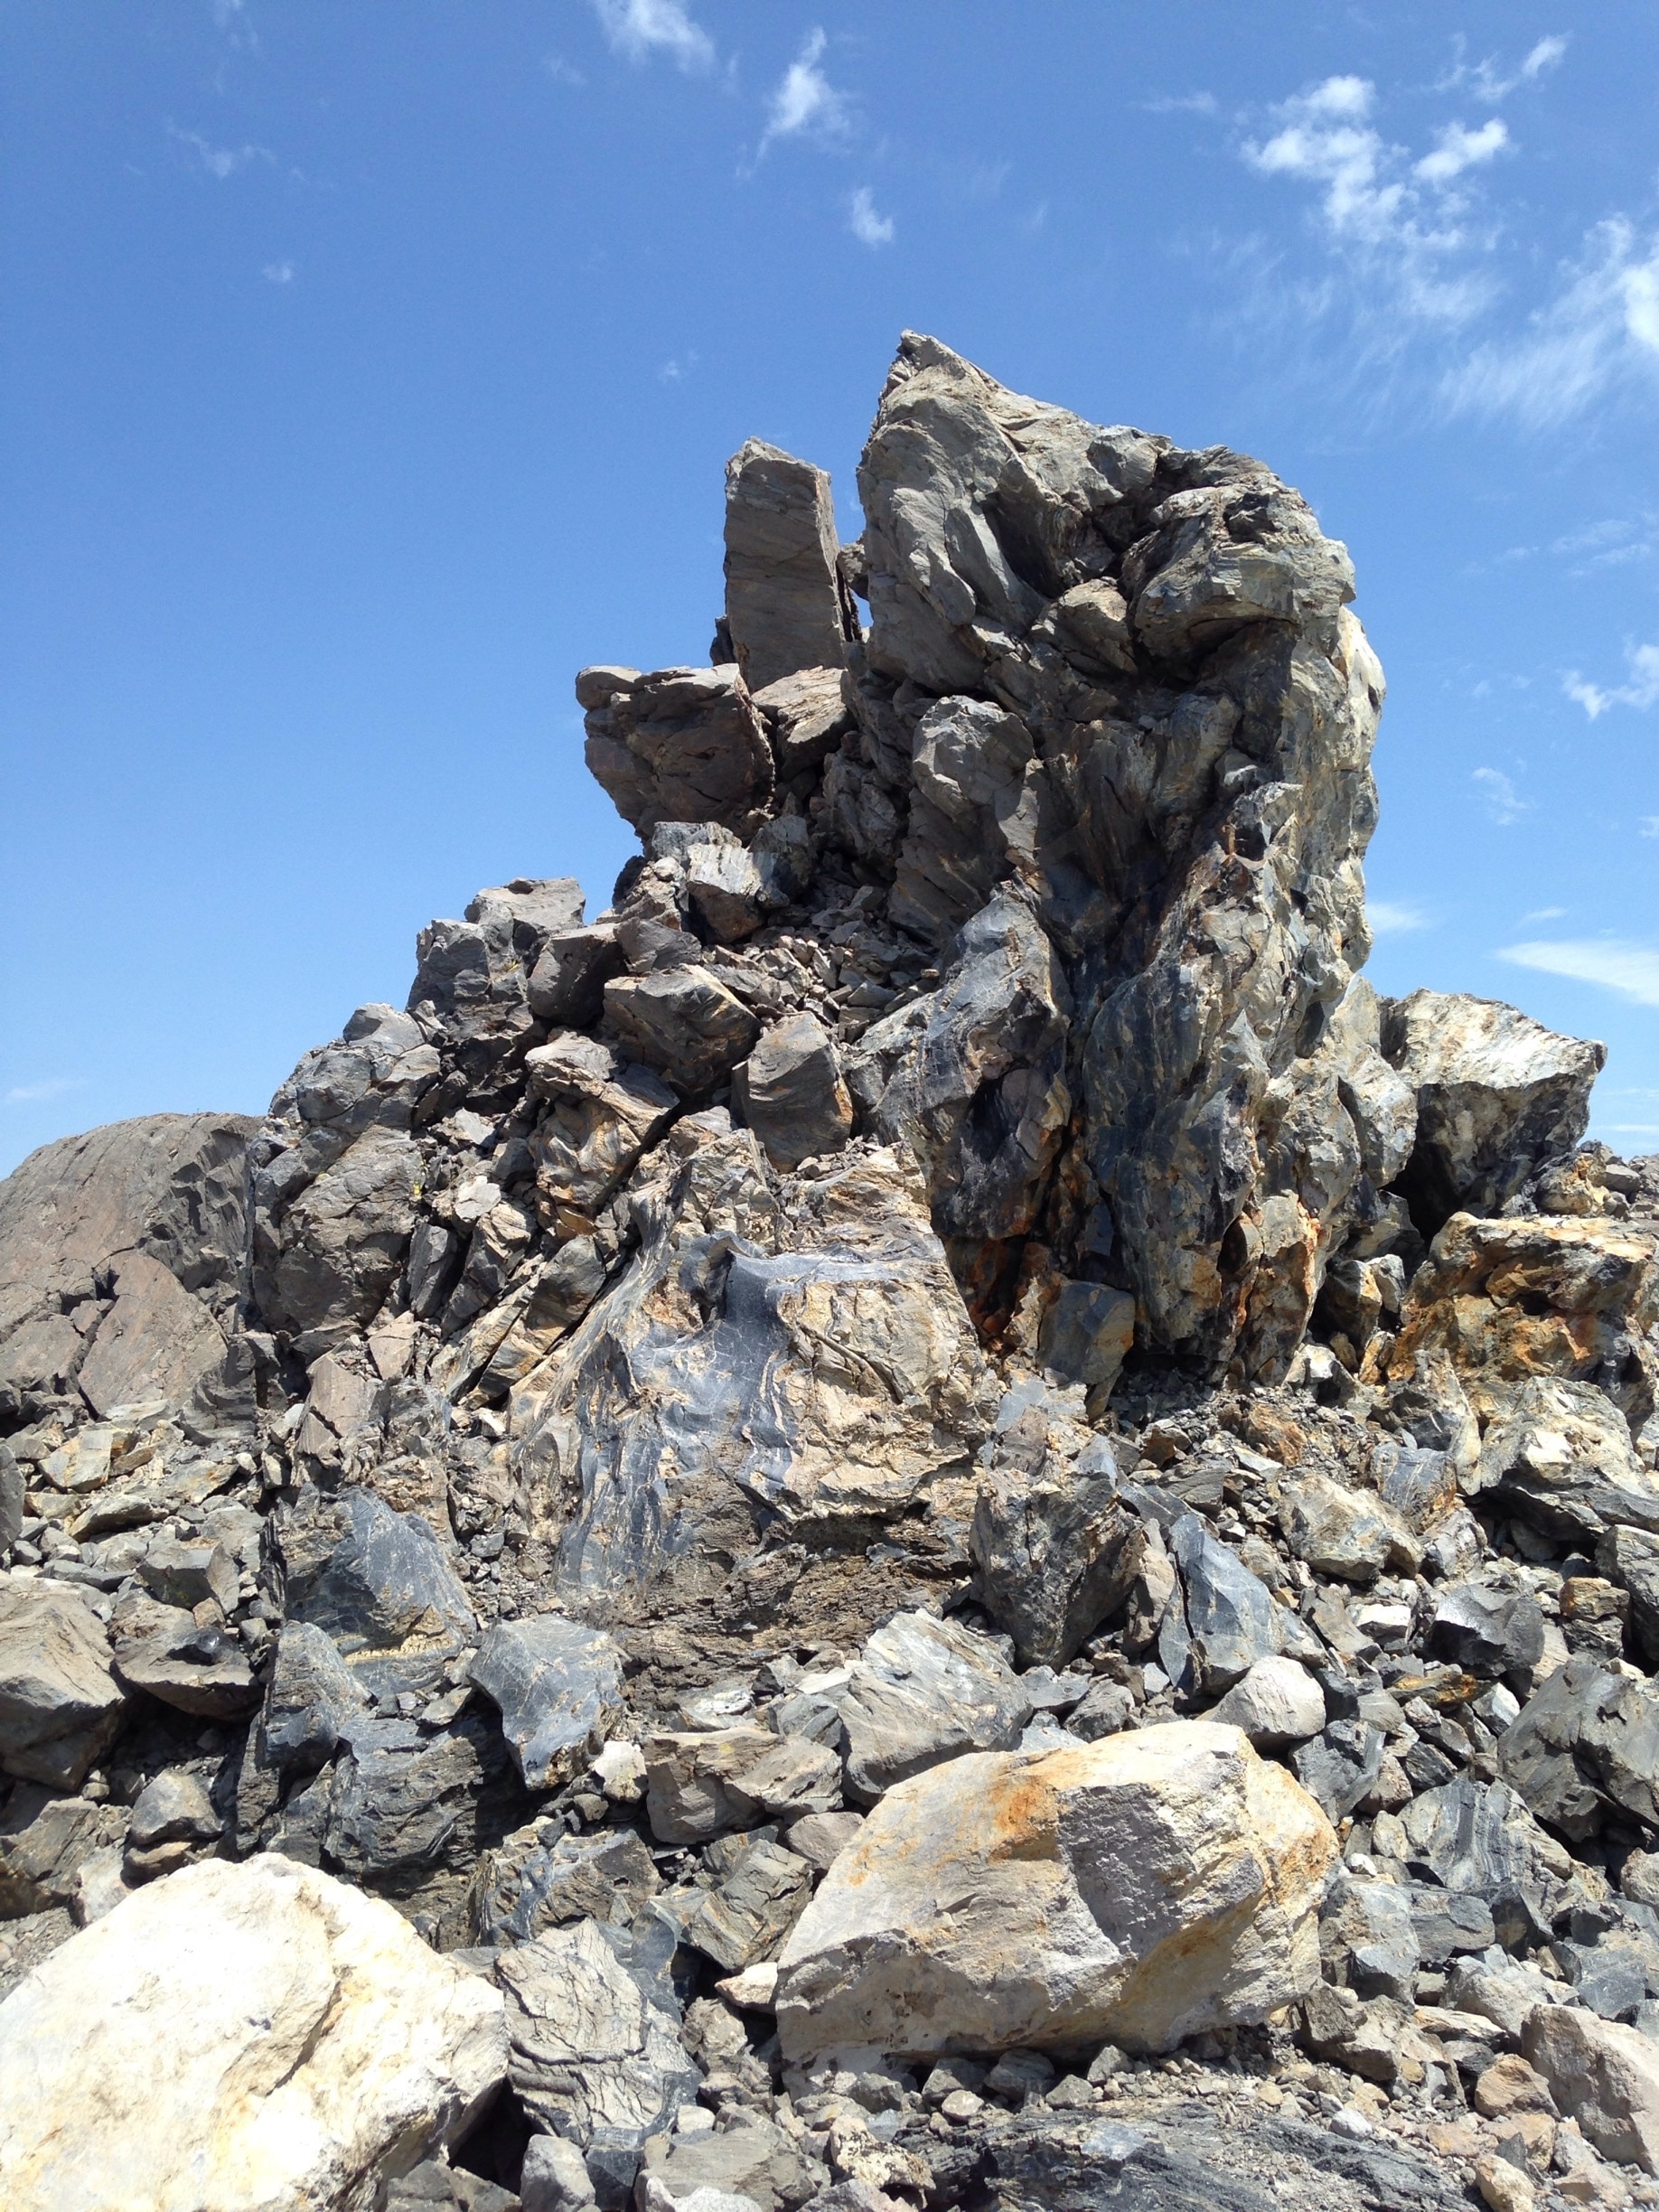 #TakeAHike through the beautiful sculptures at Obsidian Dome. Take a moment to listen to the crunch as you walk around. 